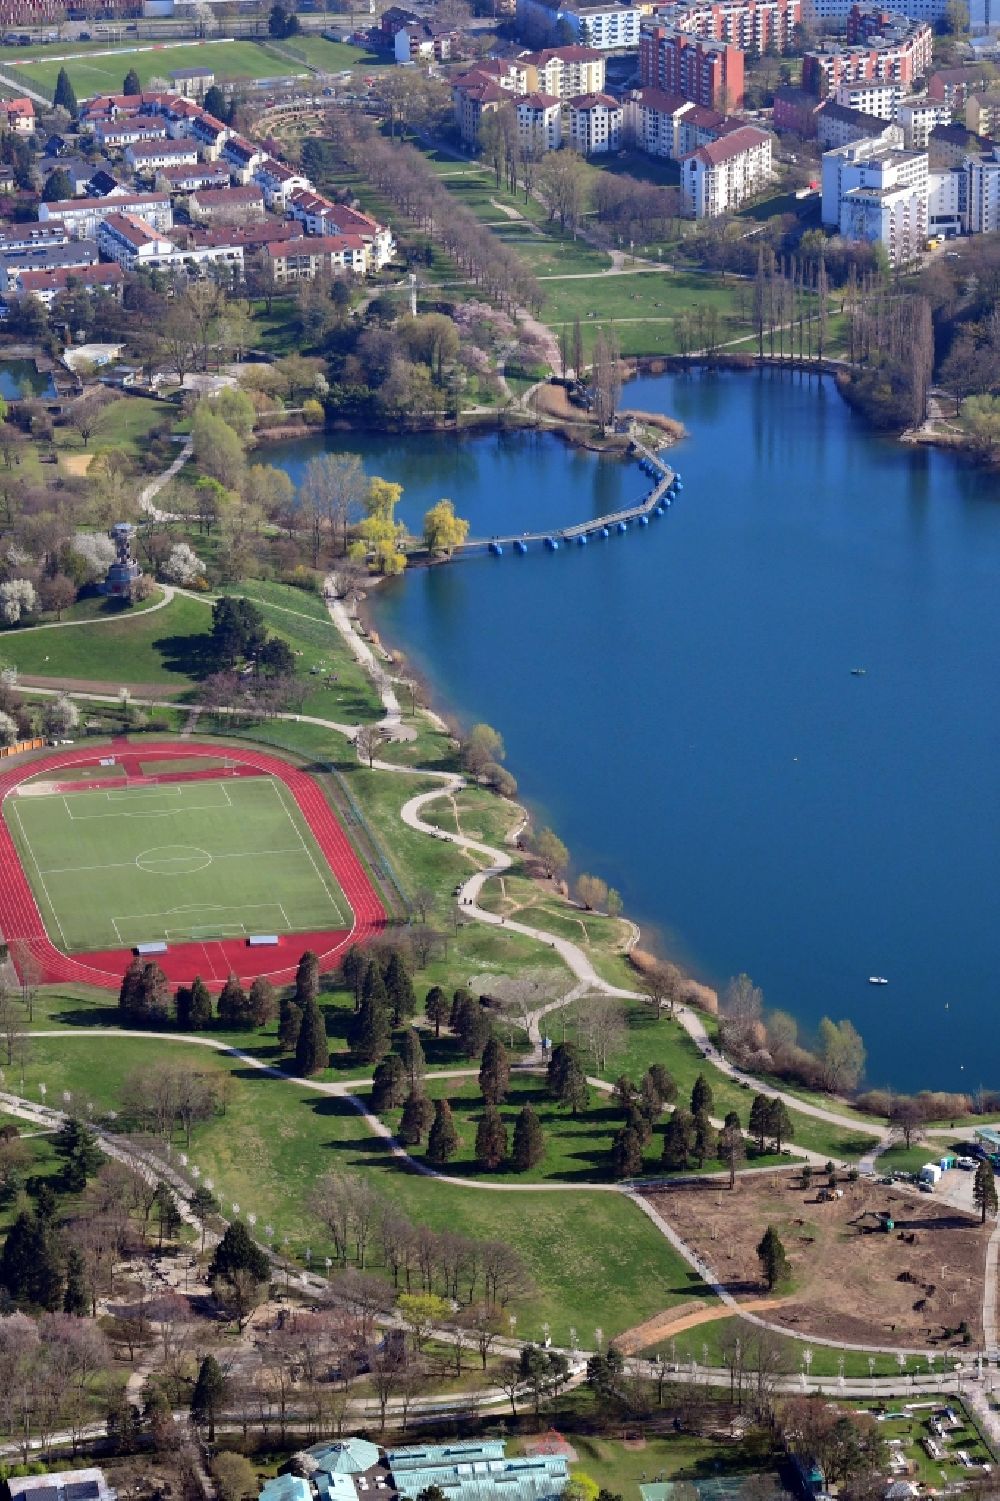 Aerial image Freiburg im Breisgau - Seepark with lake Flueckigersee on the area of the former State Garden Show in the district Betzenhausen in Freiburg im Breisgau in the state Baden-Wurttemberg, Germany